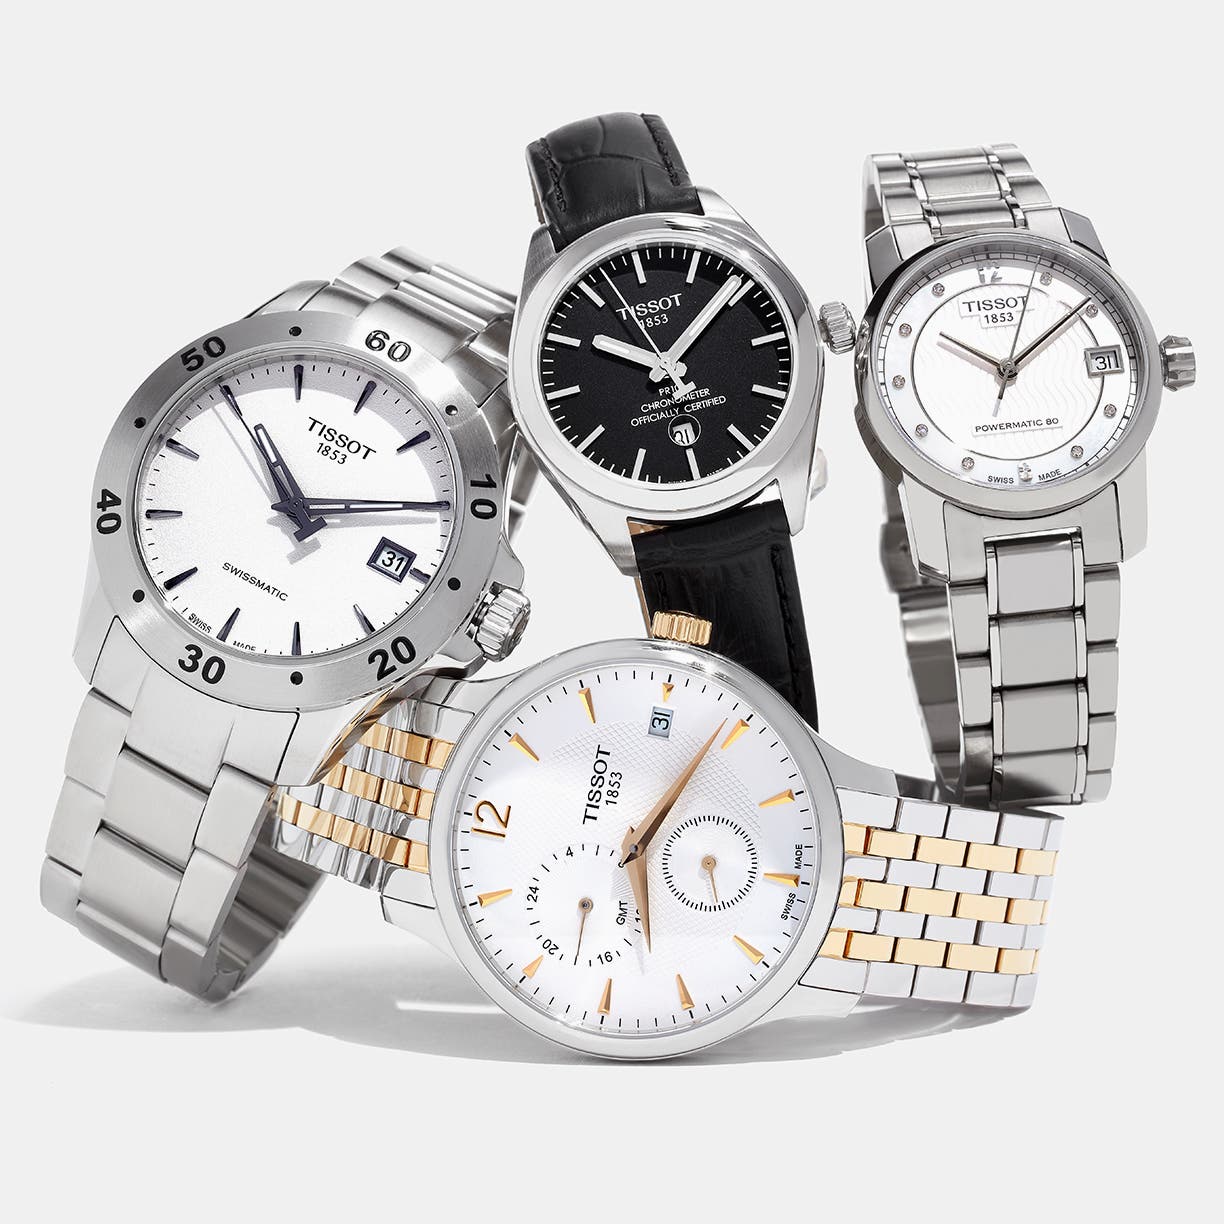 Nordstrom Rack Flash Sale: Swiss-Made Watches Starting at $120